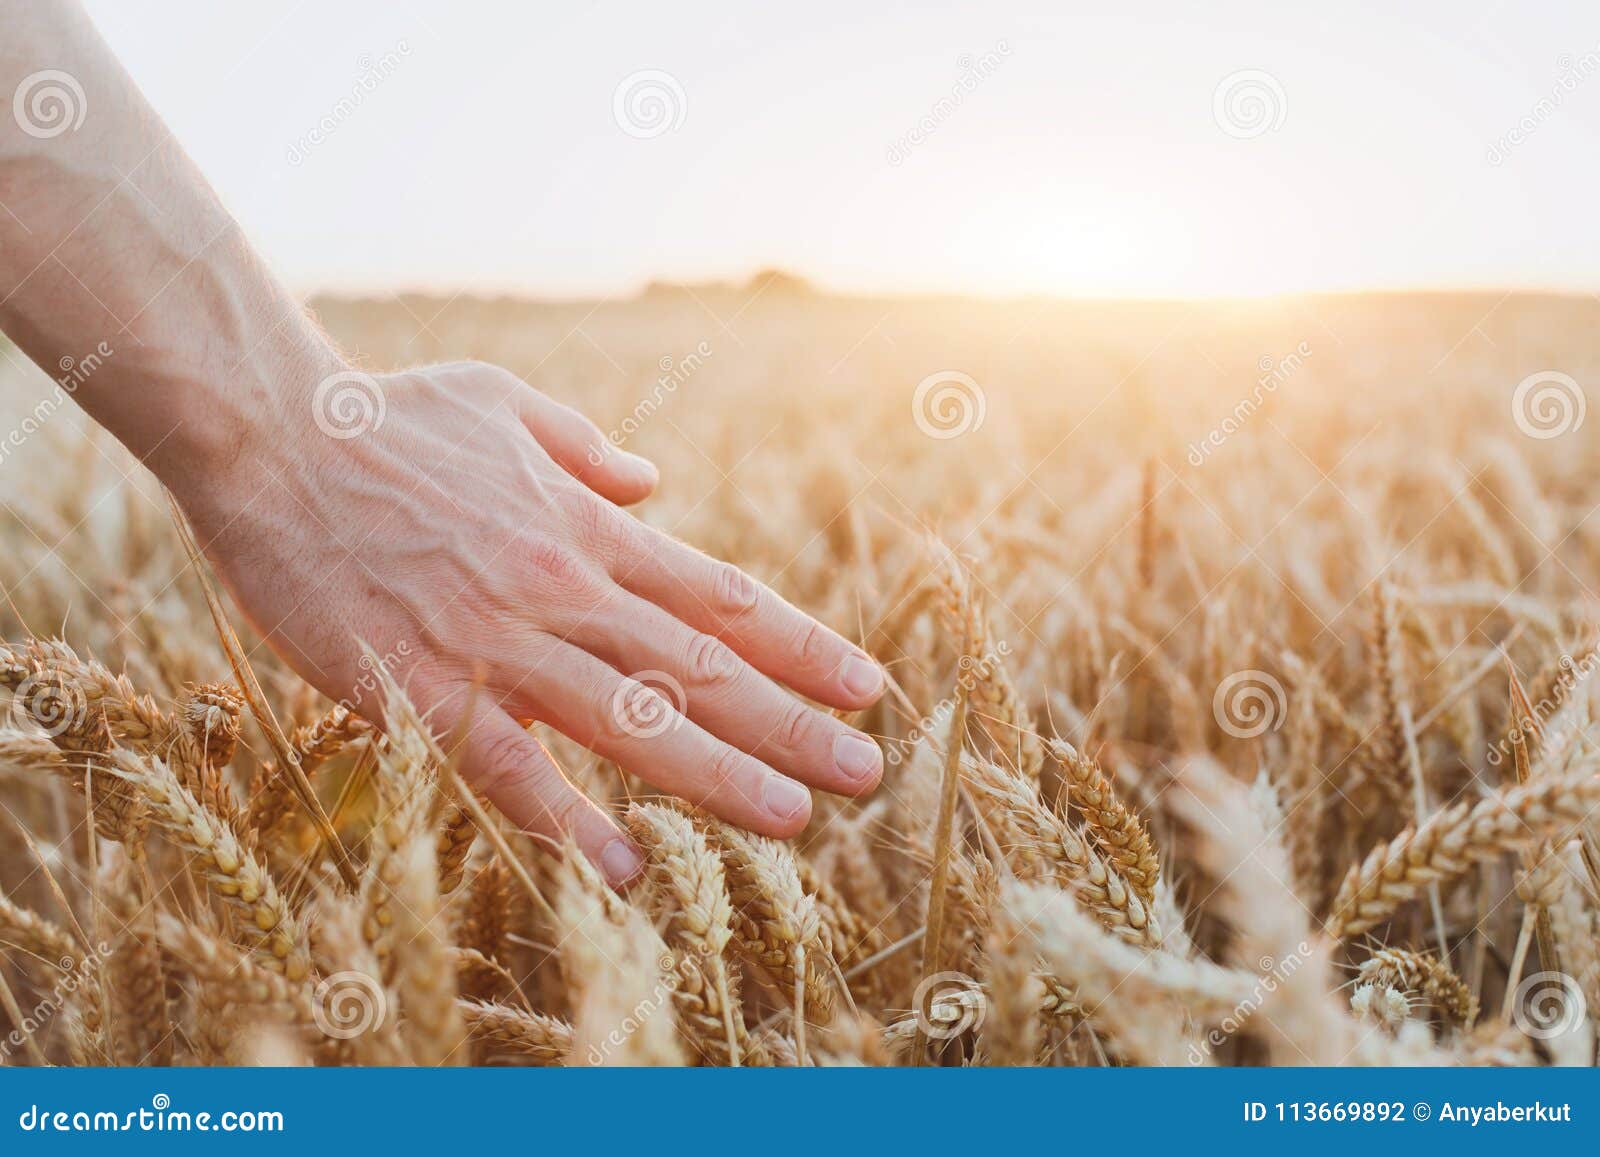 crop of wheat, close up of hand, healthy life and wellness